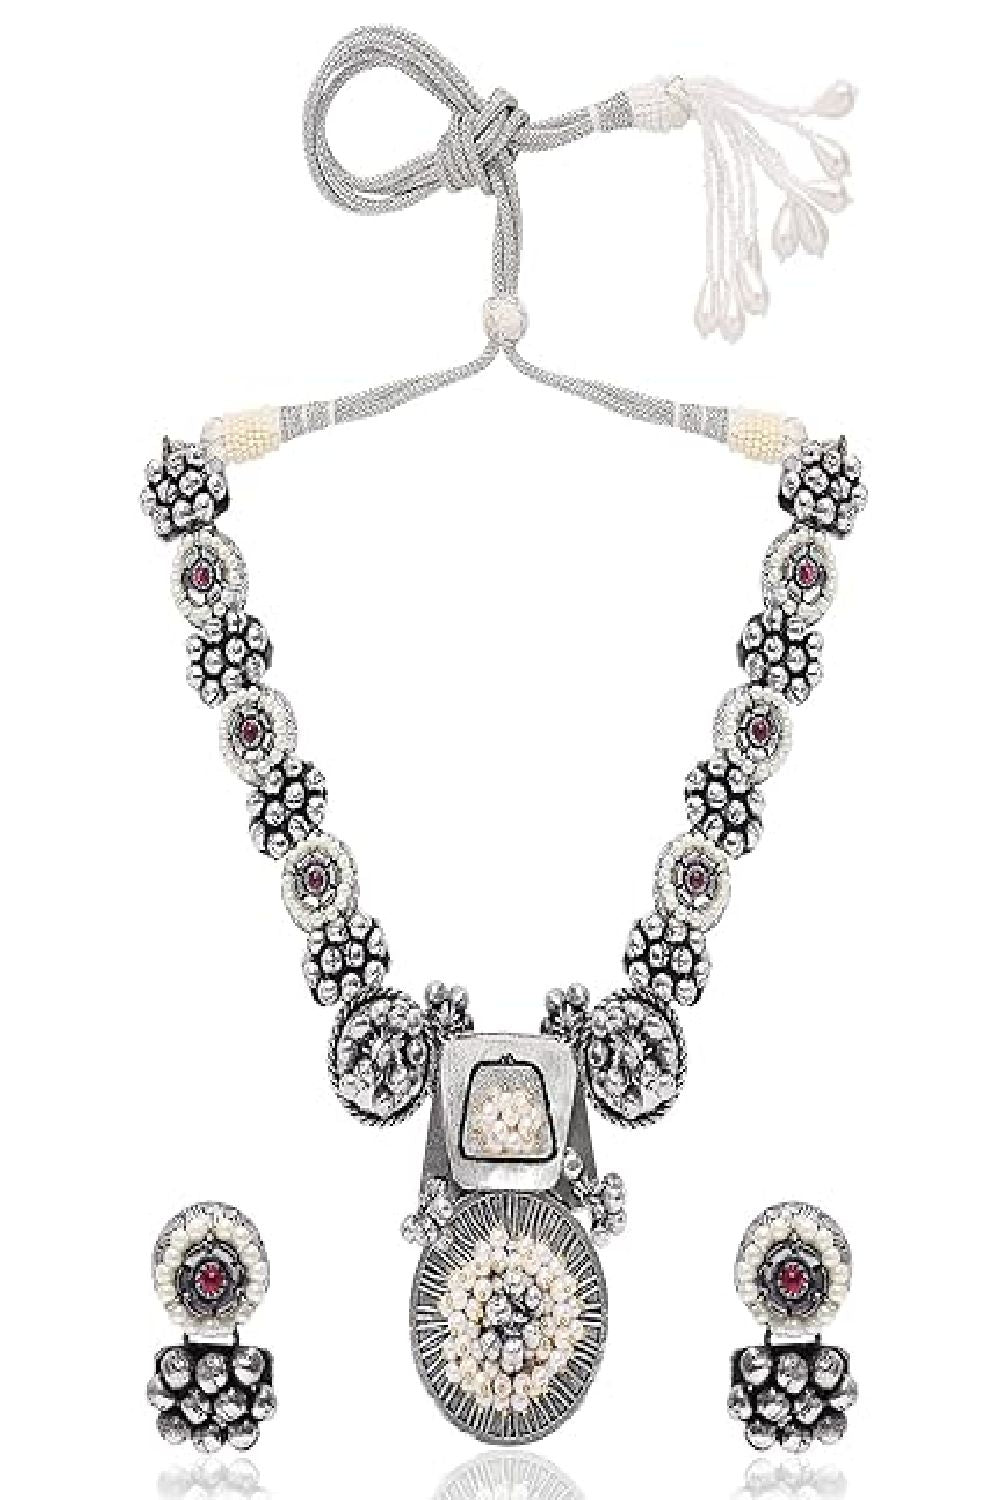 Navratri German Silver Oxidised Jewellery Antique Long Necklace Set with Earrings